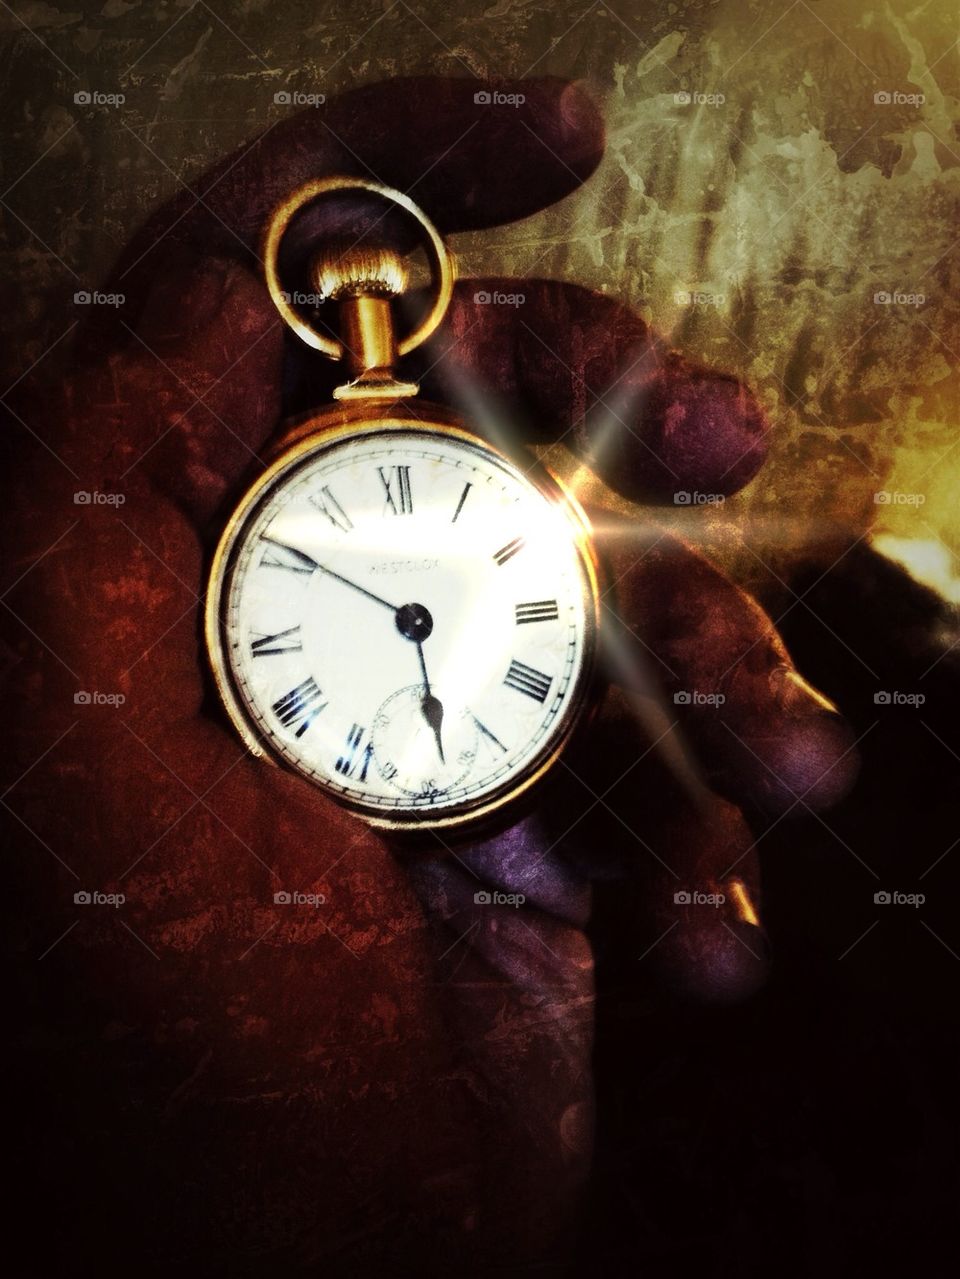 Antique pocket watch with grain effects